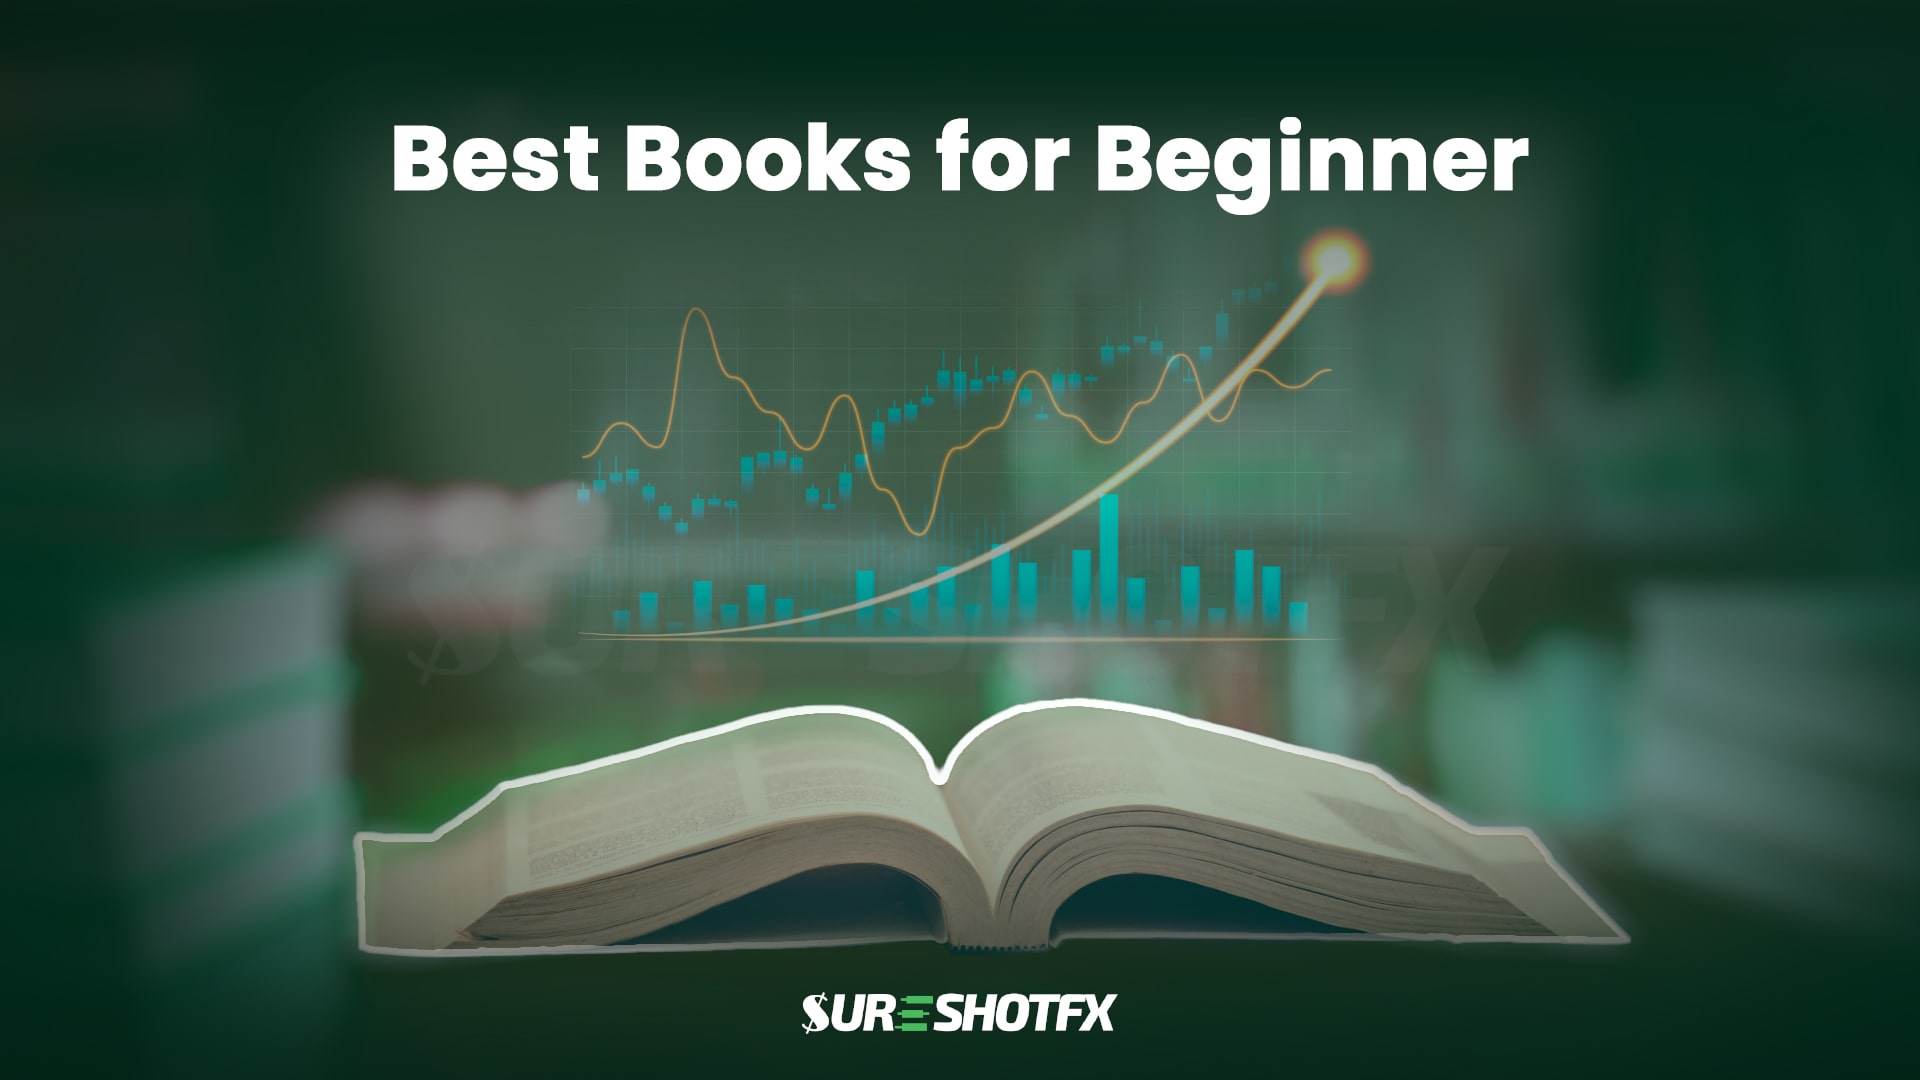 green background with an open book featuring the best books for beginners